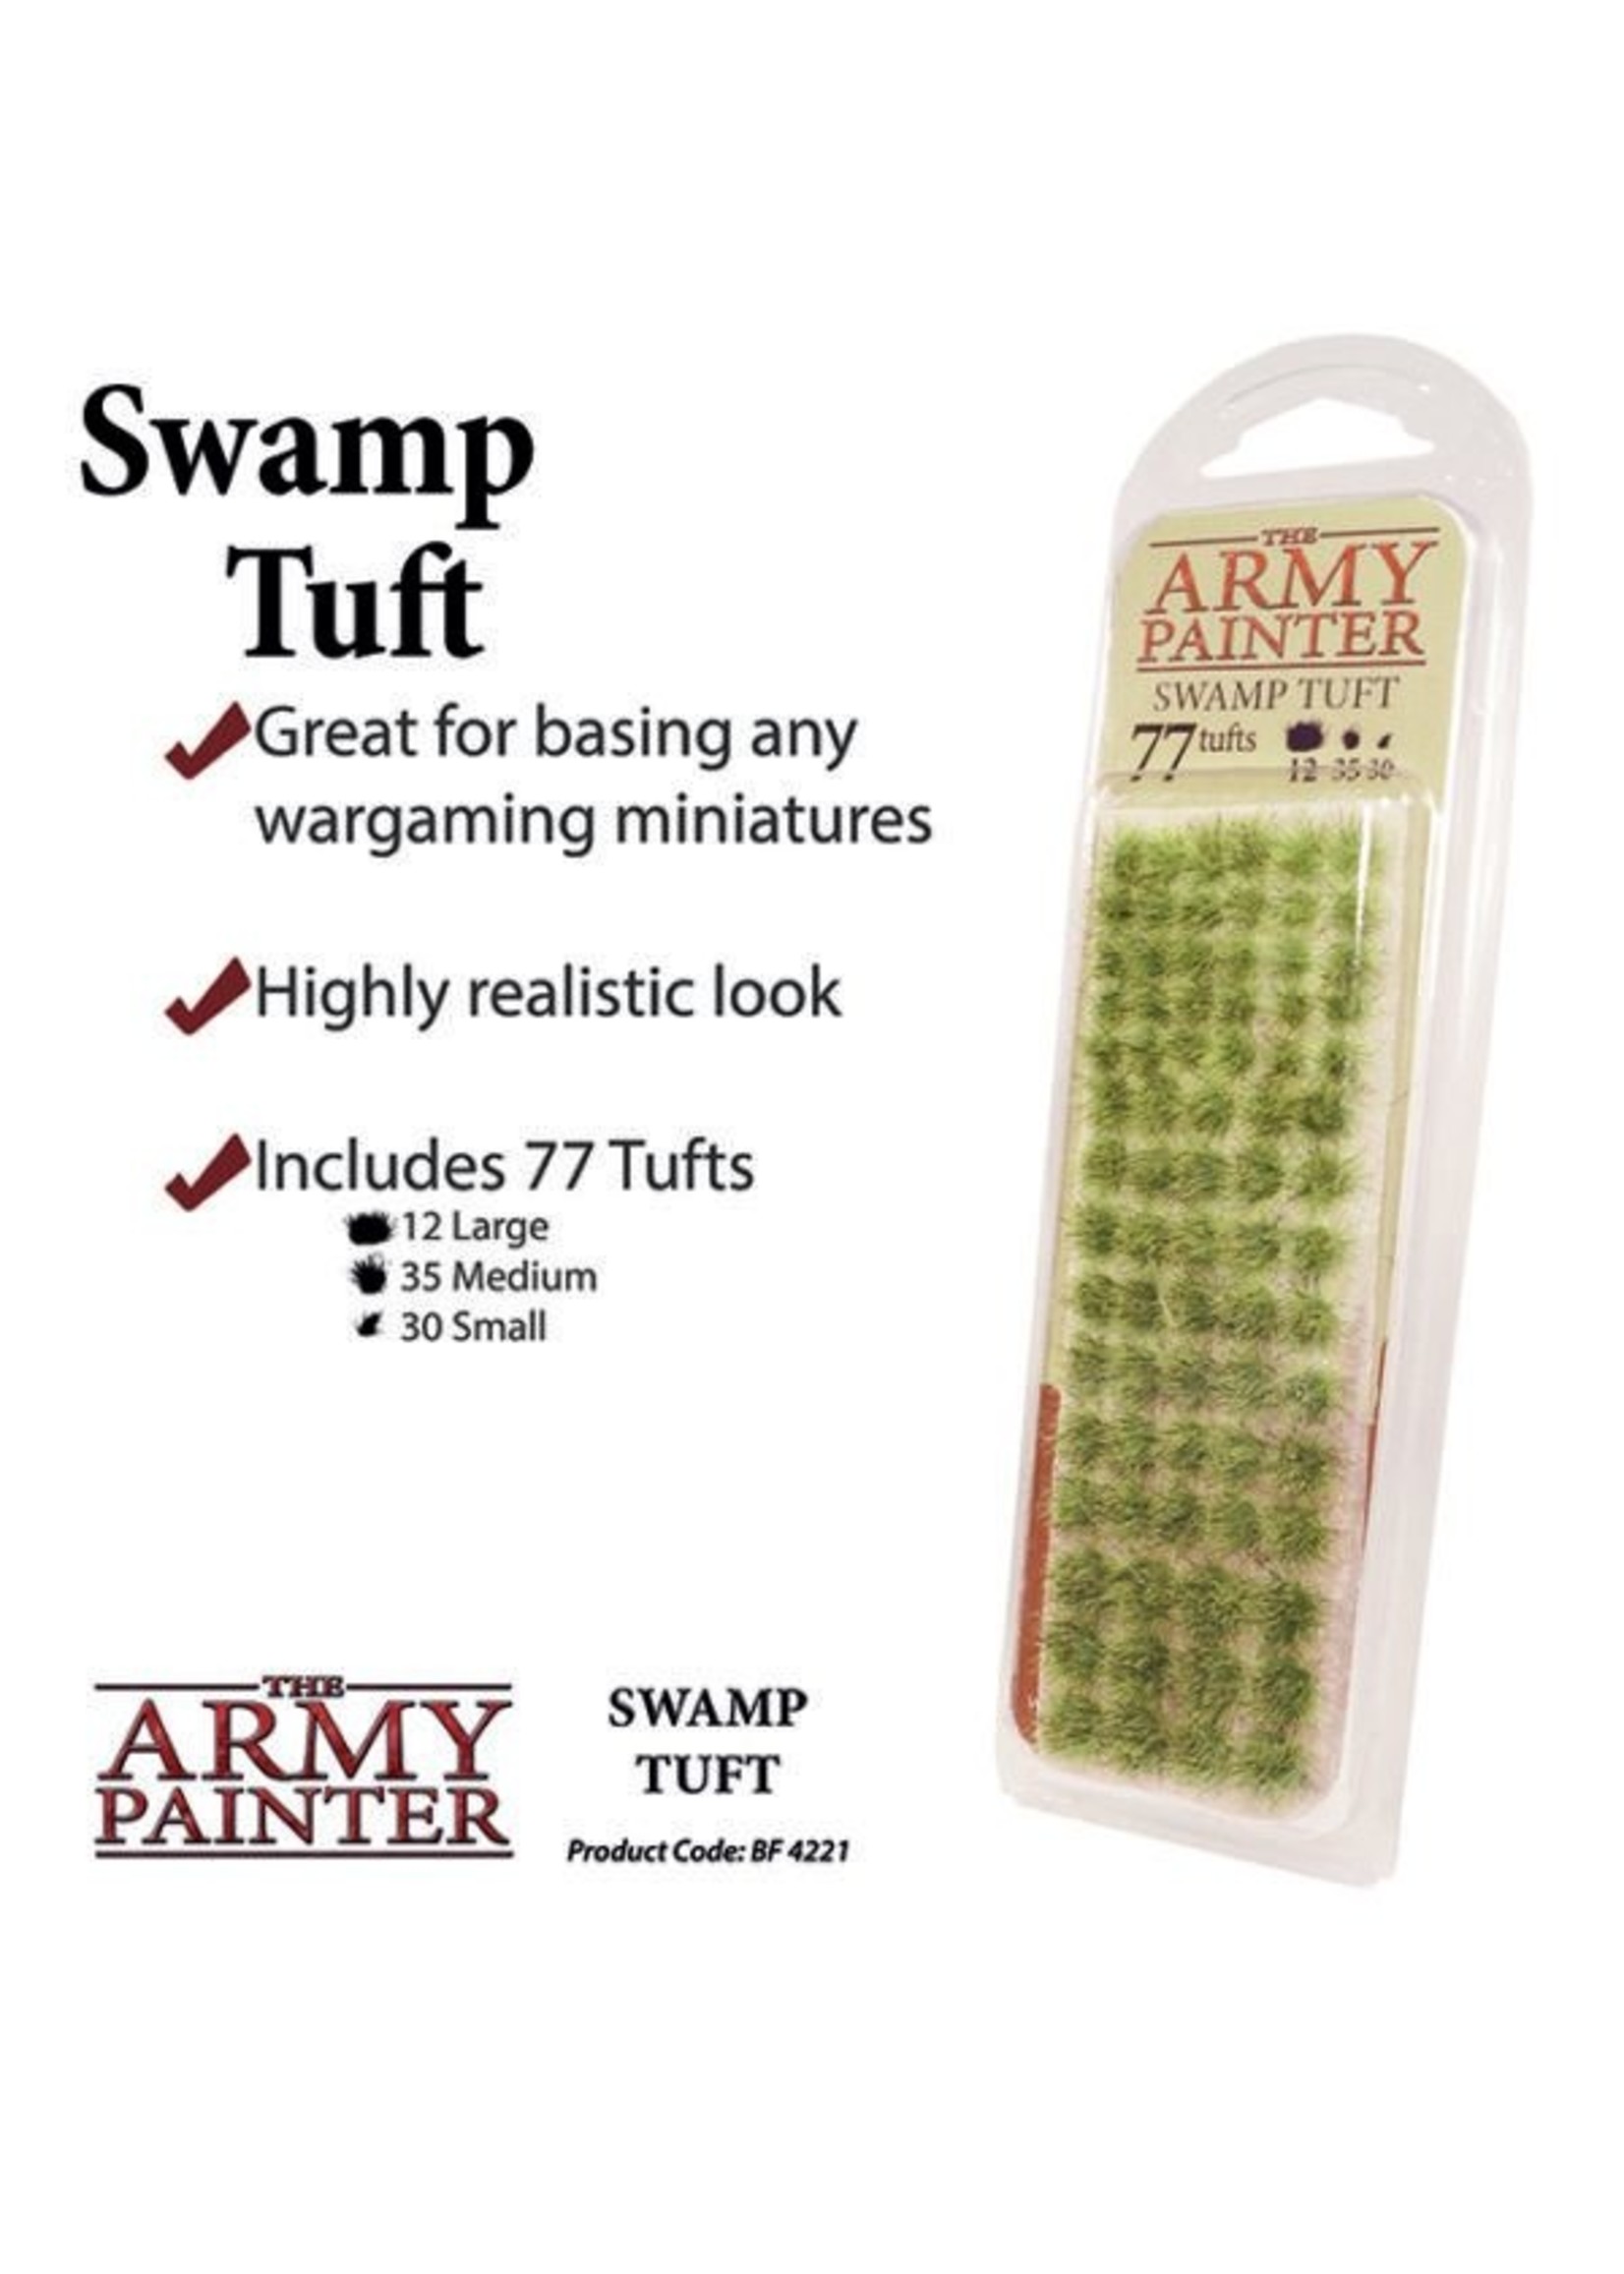 The Army Painter Tufts: Swamp